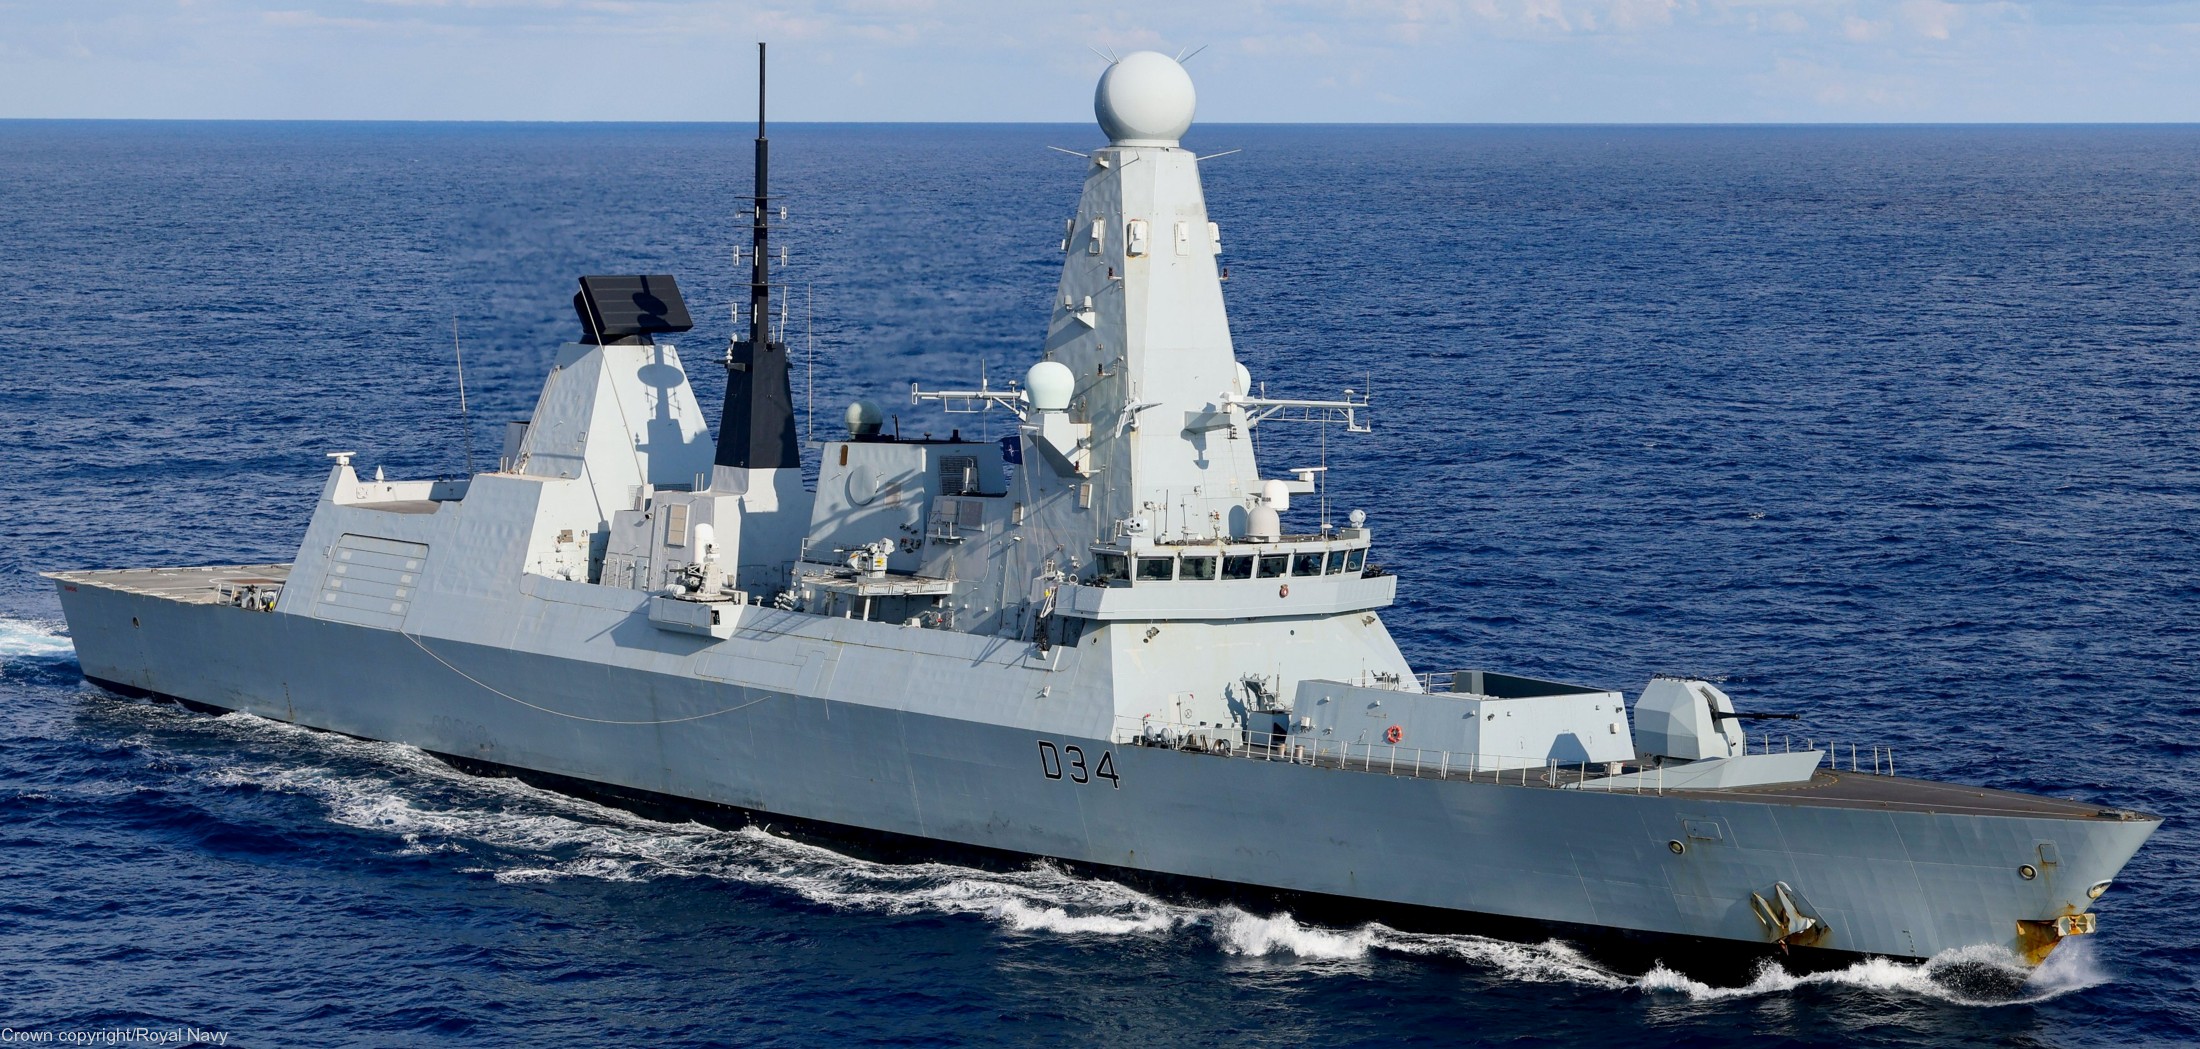 d34 hms diamond d-34 type 45 daring class guided missile destroyer ddg royal navy sea viper paams 51